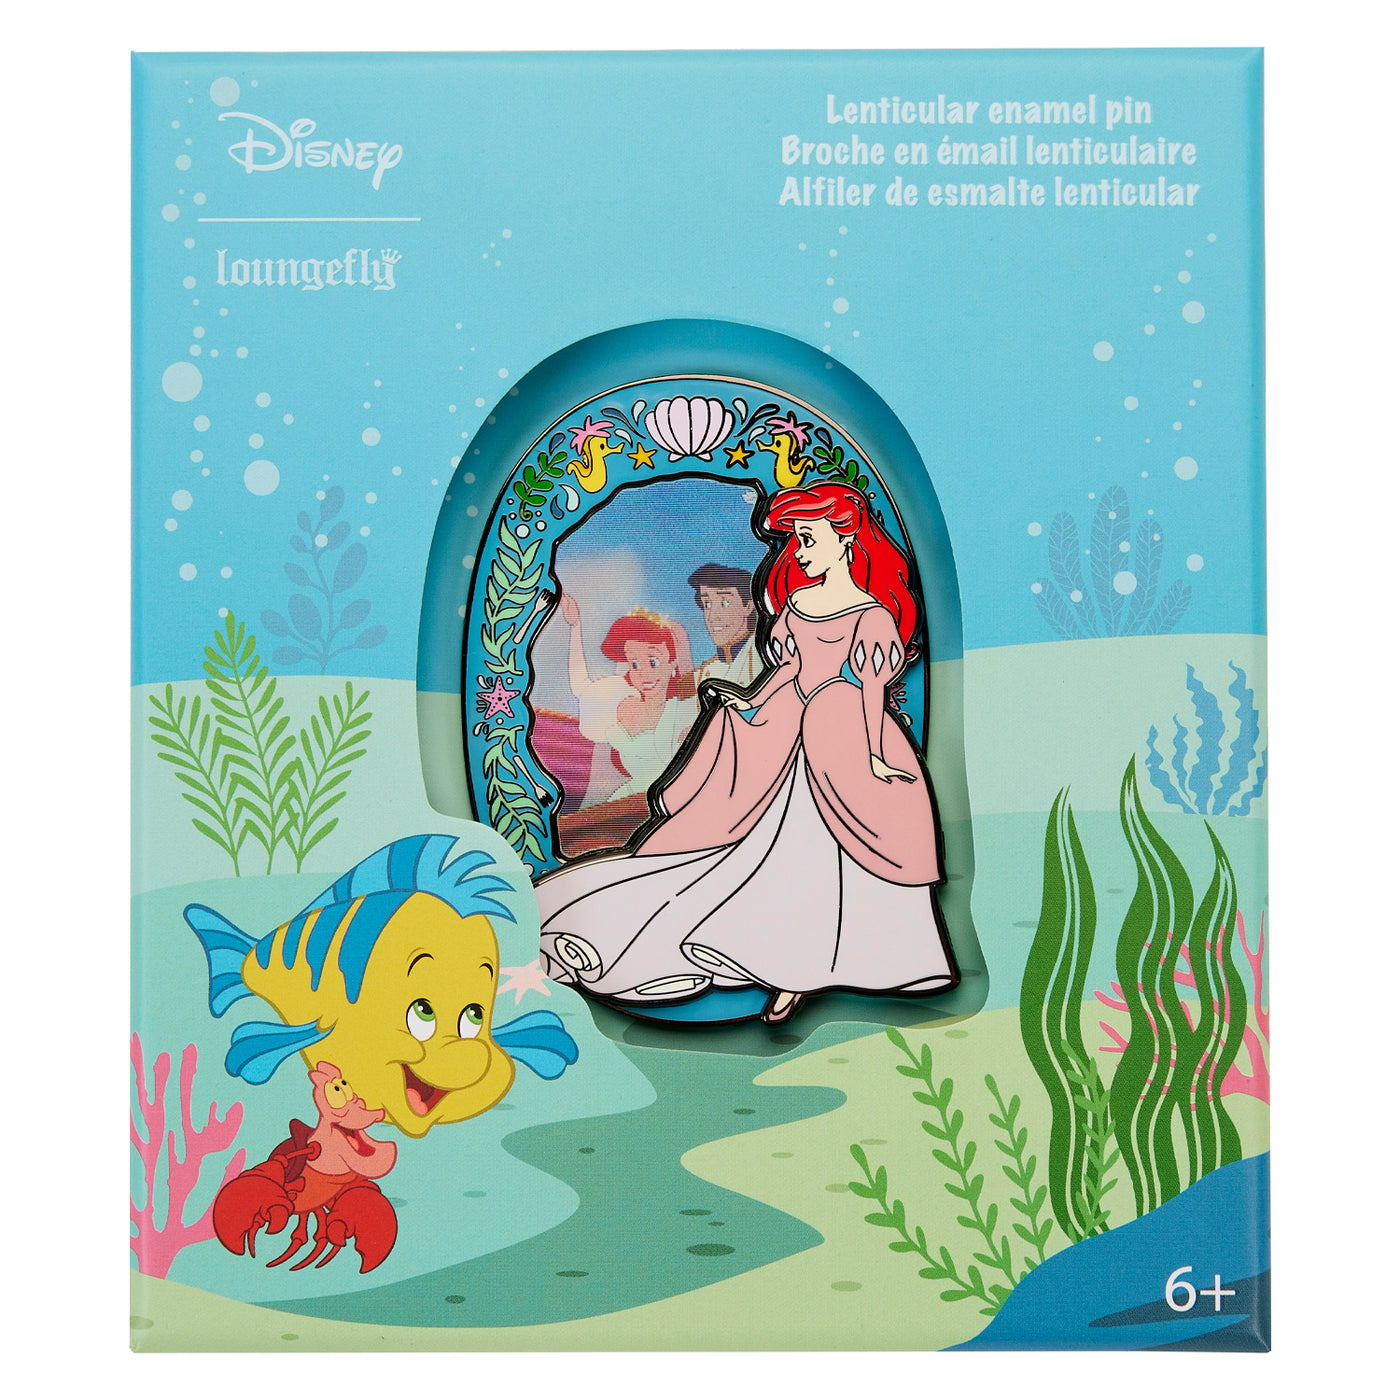 Disney The Little Mermaid Ariel Princess Lenticular Series 3" Collector Box Limited Edition Pin